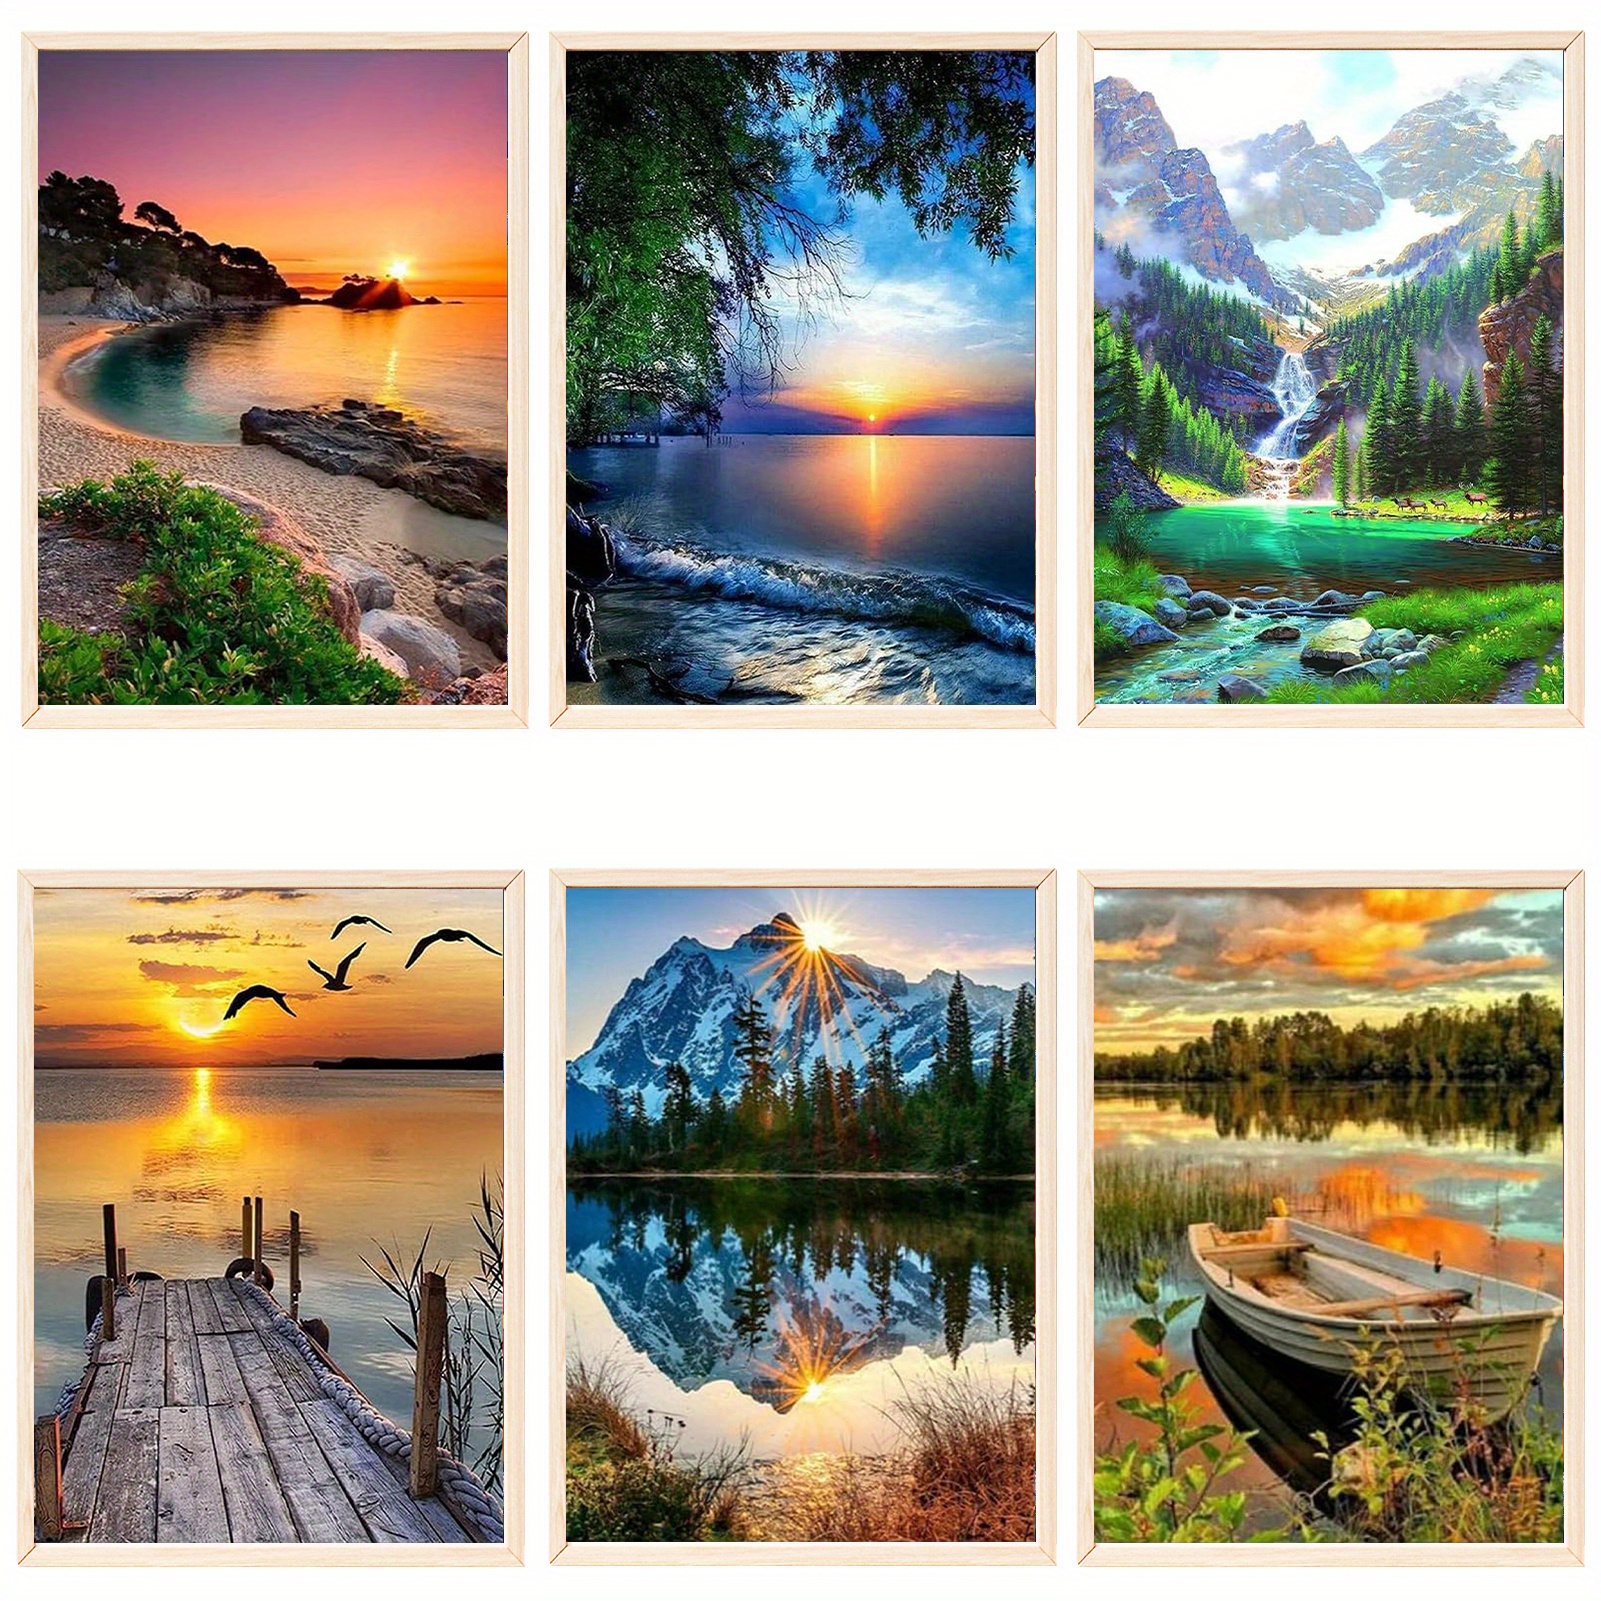 4pcs/set Landscape Digital Oil Painting Kit (11.8x15.7 Inch/30x40cm) With  Acrylic Paints Set, Ideal Decoration As Artwork For Home Room, Suitable For  Beginners And Adults